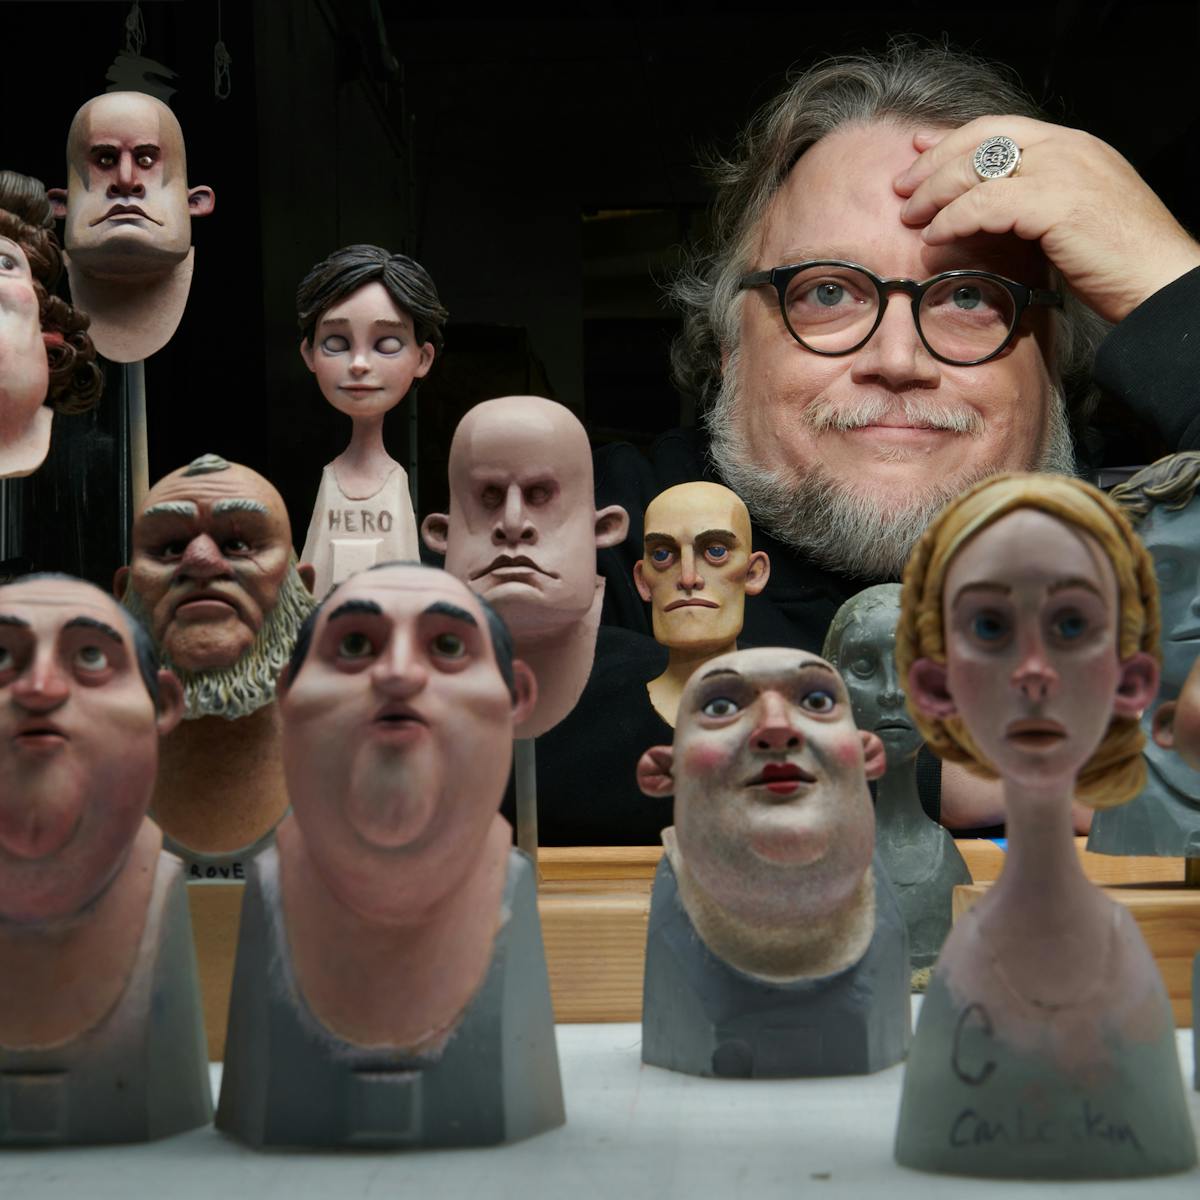 Guillermo del Toro looks at the camera through a crowd of puppets.